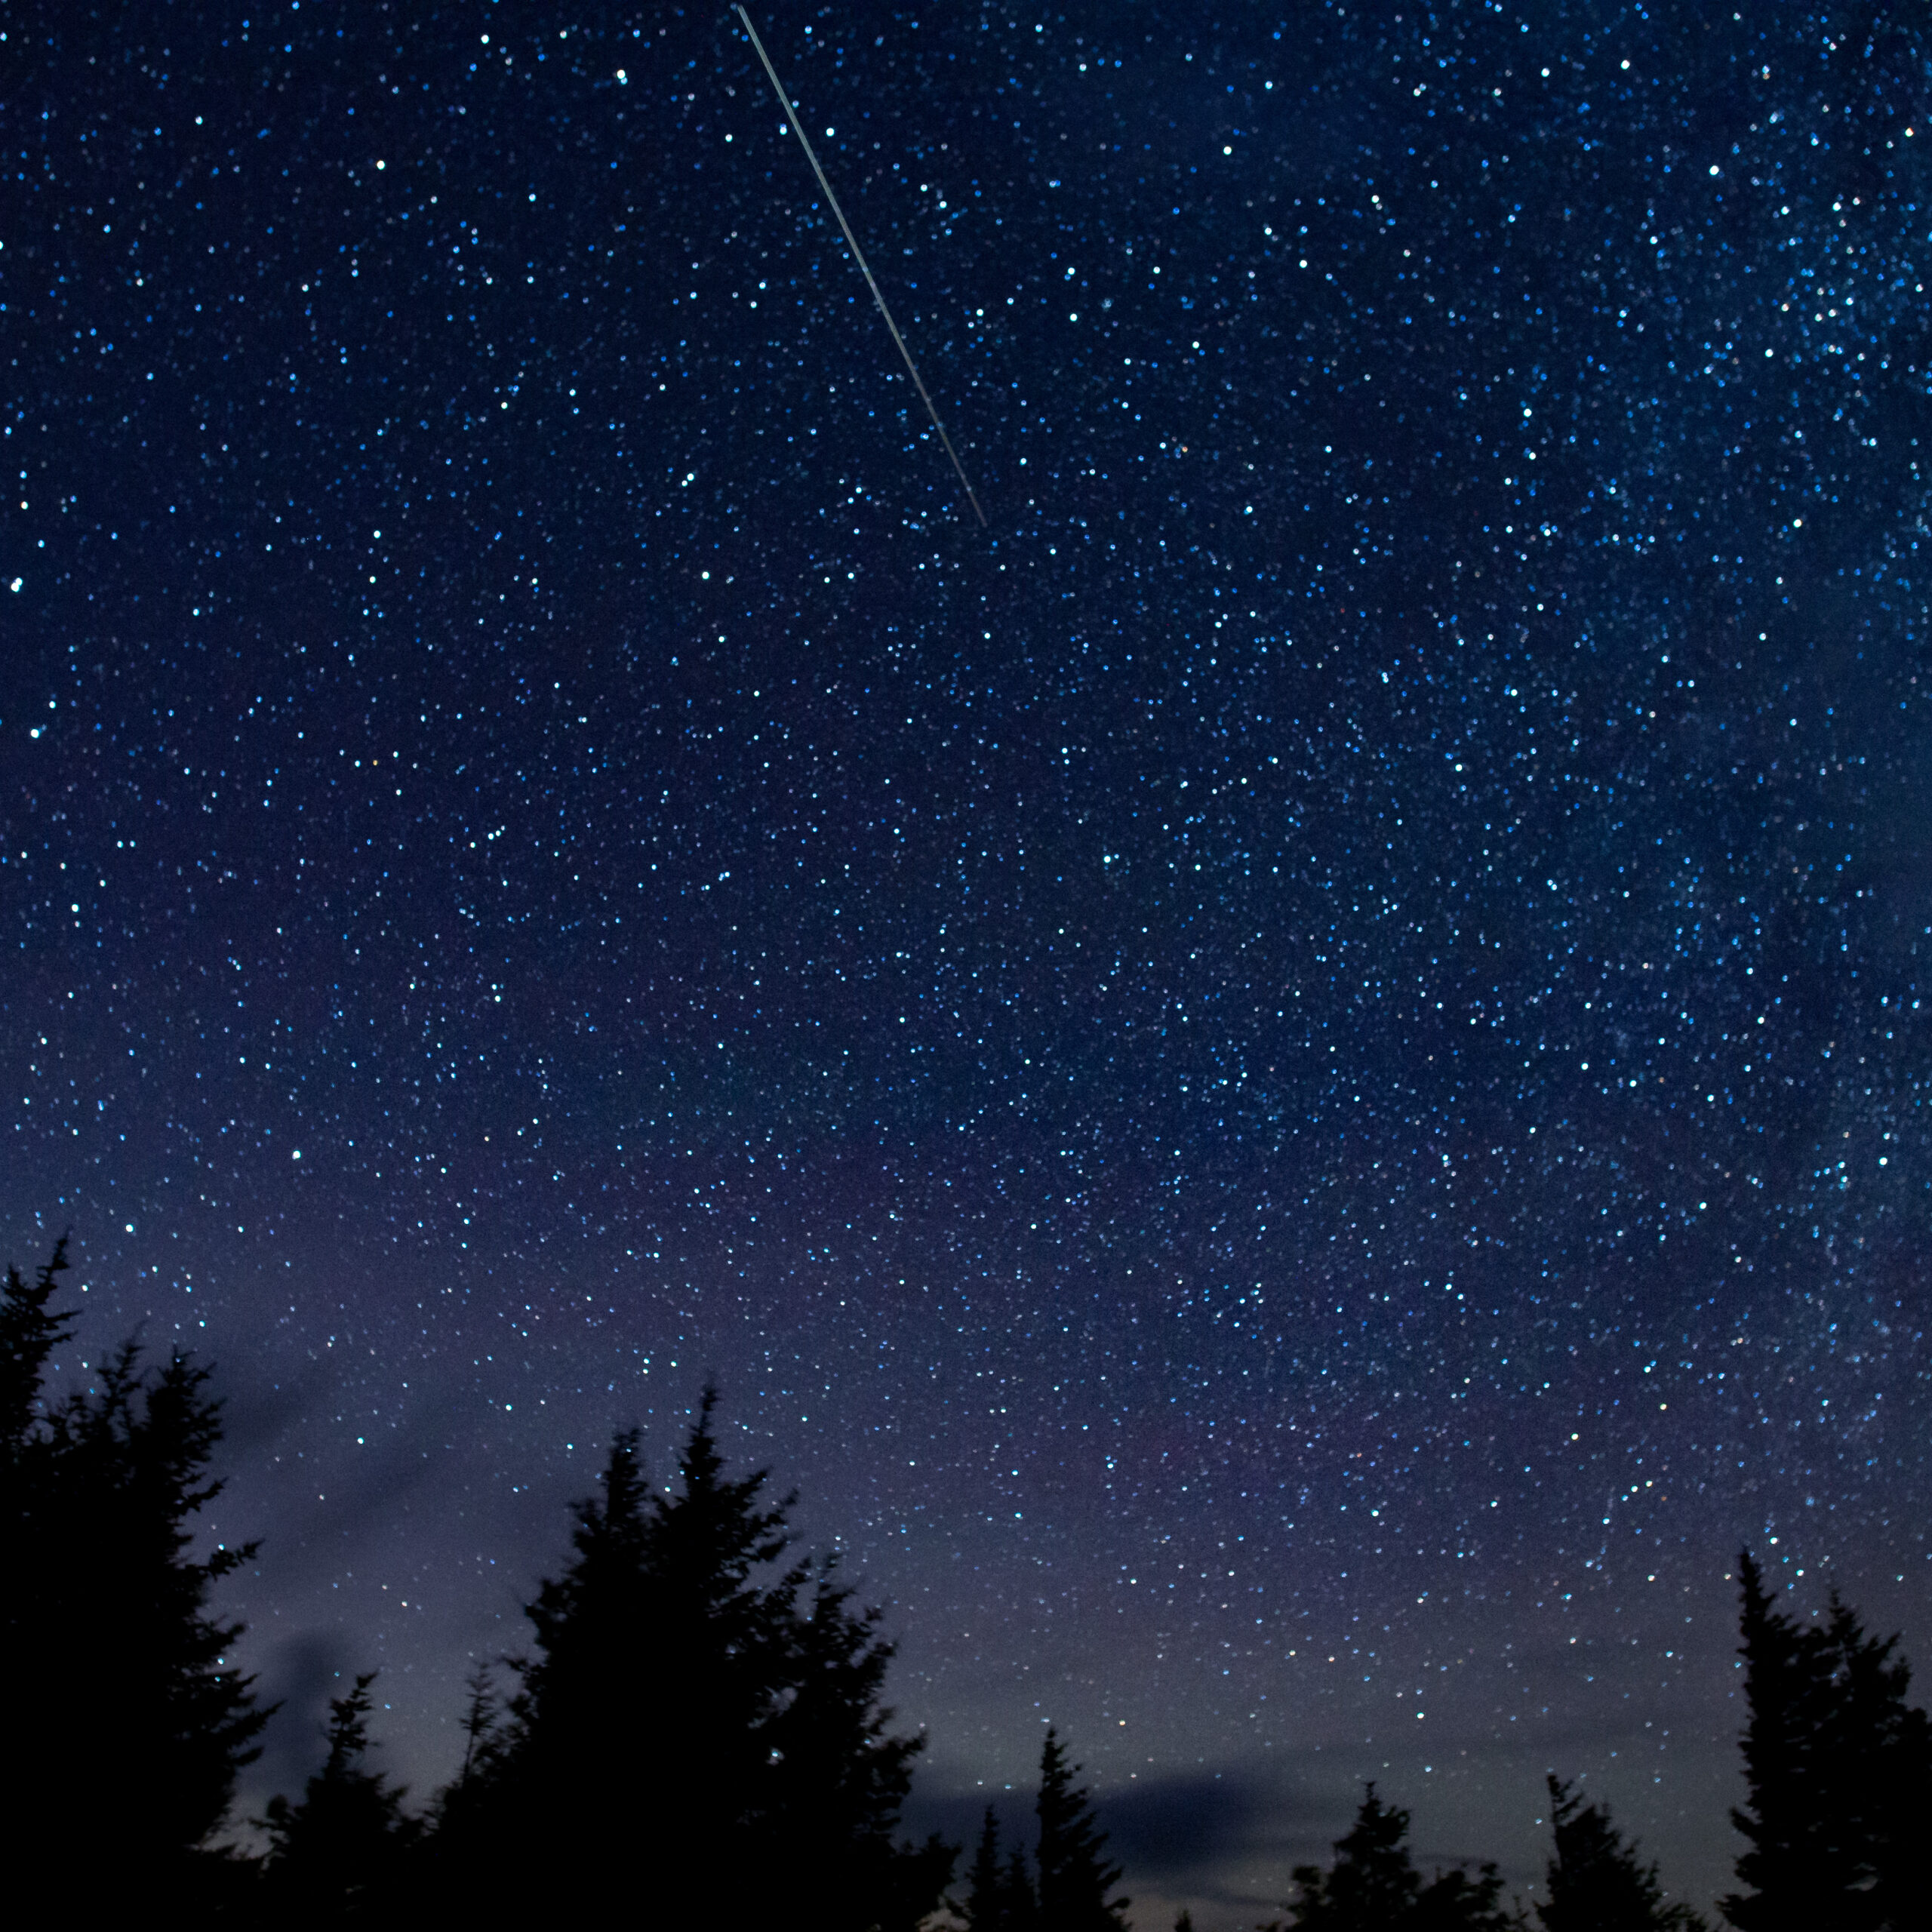 Meteor Shower Occurring RIGHT NOW: Get a Glimpse of the Show!